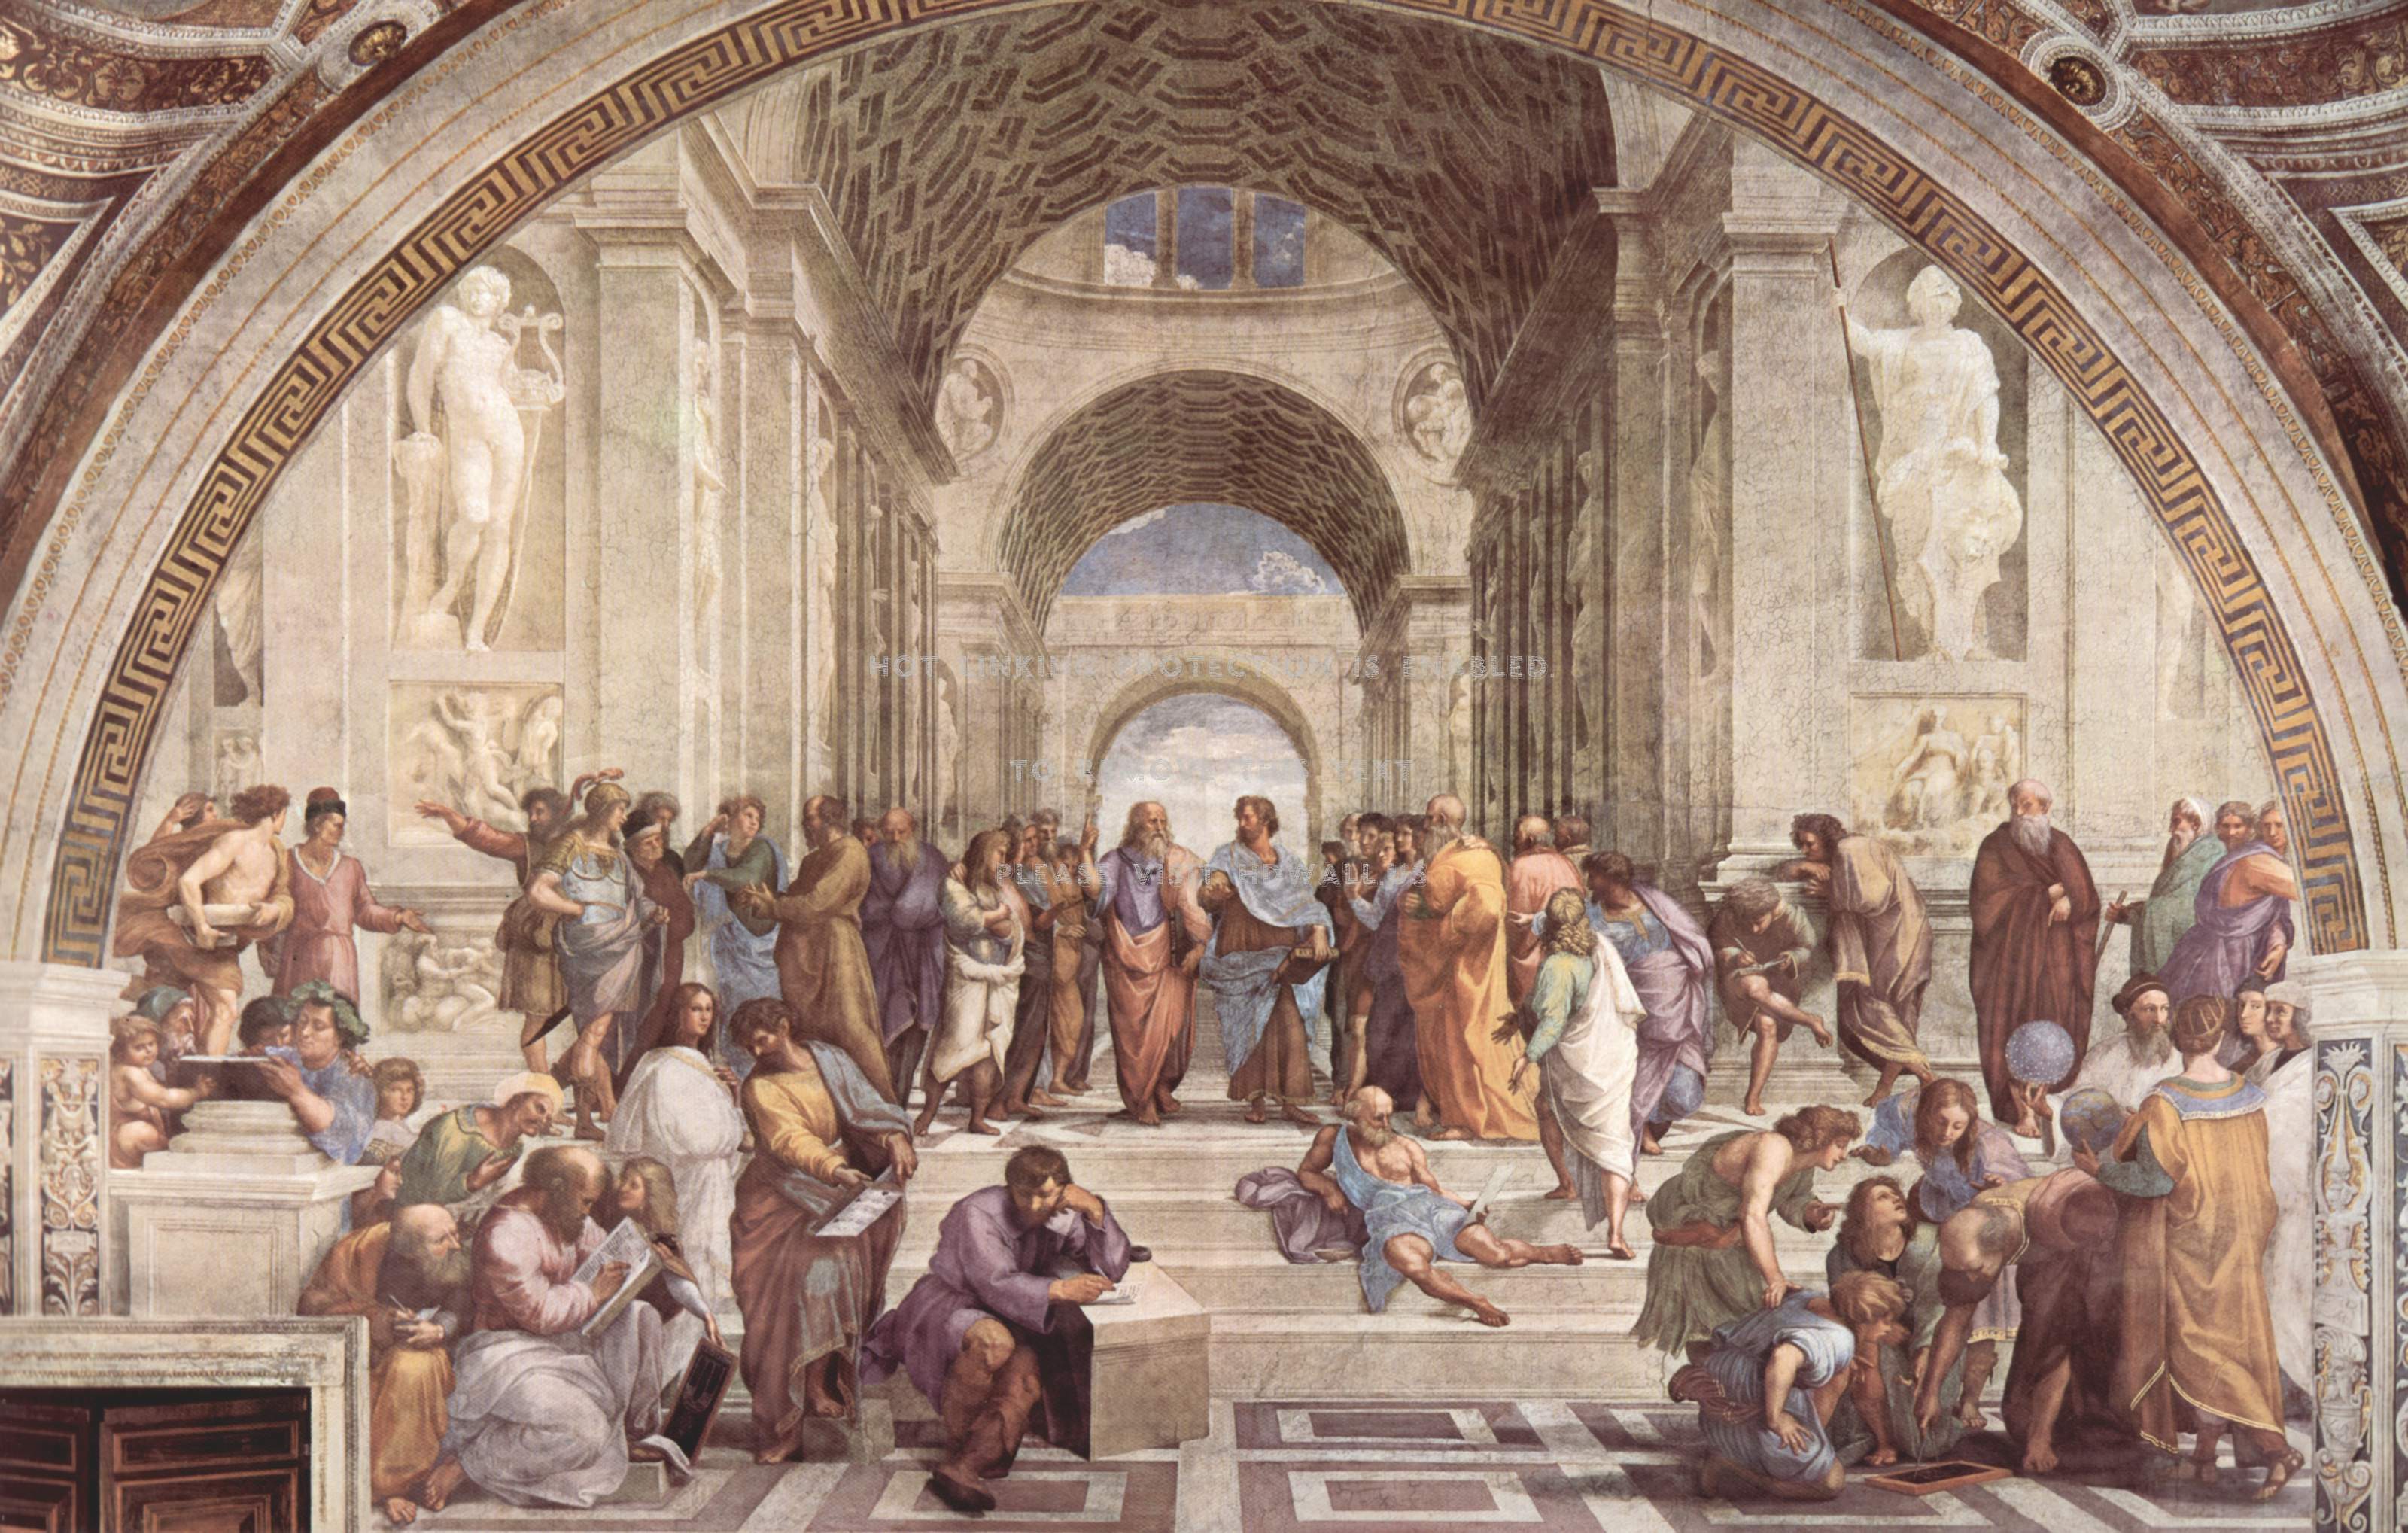 The School of Athens Wallpaper. Back to School Wallpaper, God High School Wallpaper and Old School Wallpaper